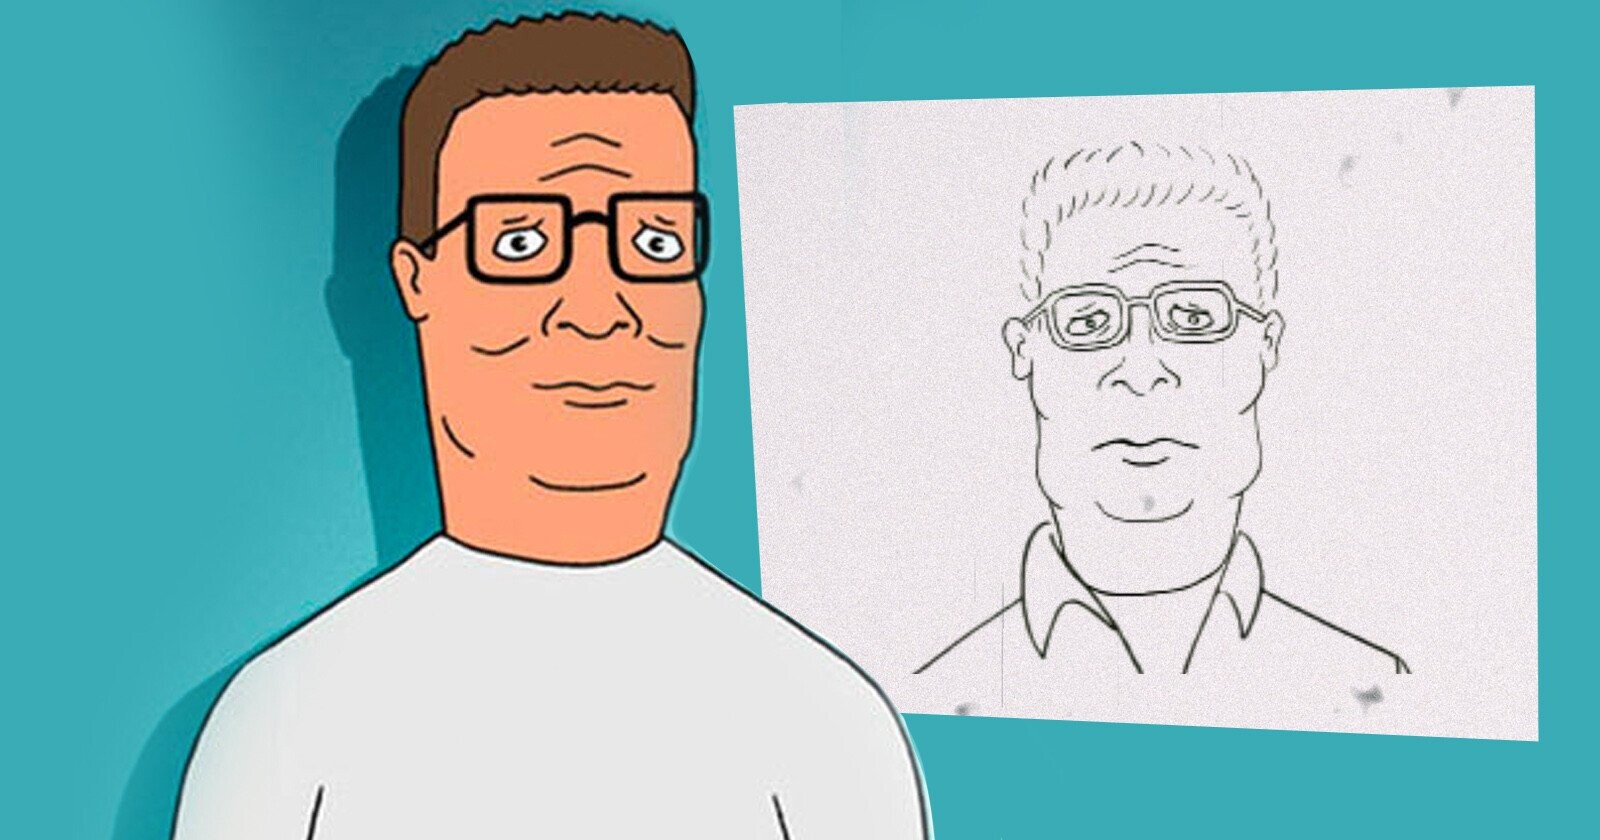 Hulu's 'King of the Hill' Reboot: Everything We Know So Far